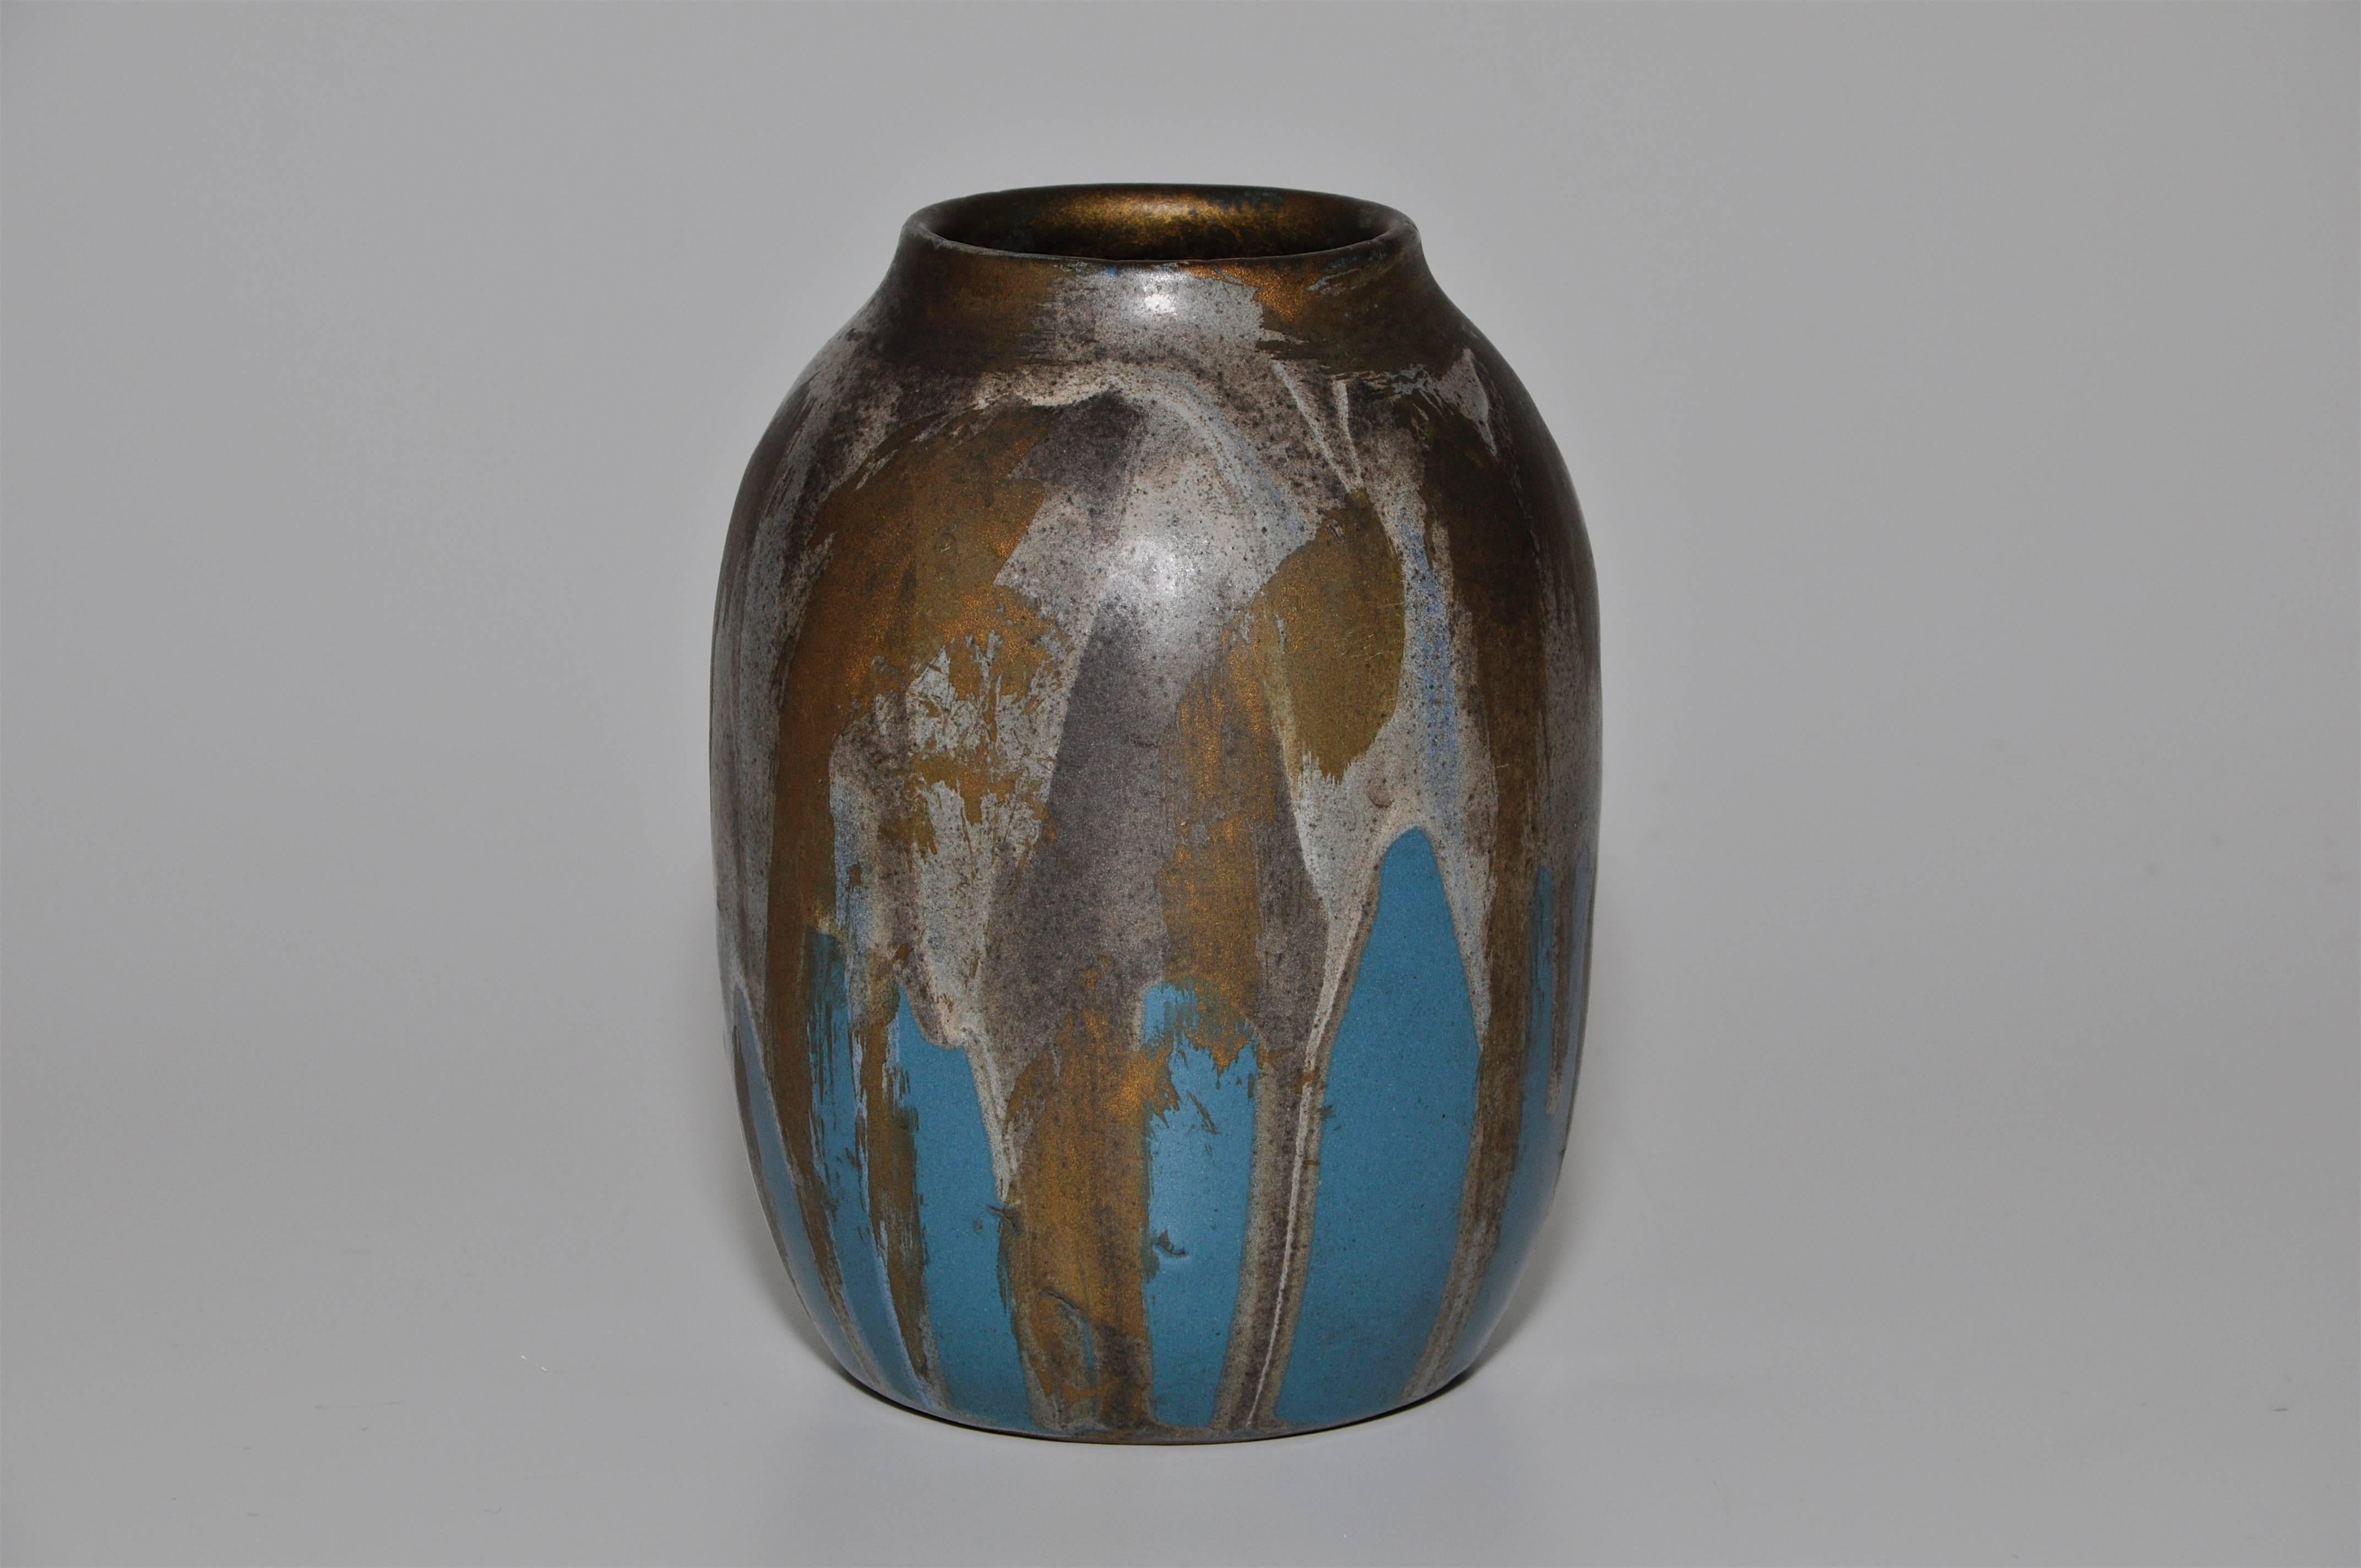 A beautiful piece of stoneware art pottery with painterly stokes of bronze gold brushed over a dripped white glaze on a rich blue base. He worked alongside his father before taking over the studio and acquiring the same style. The rim is a superb